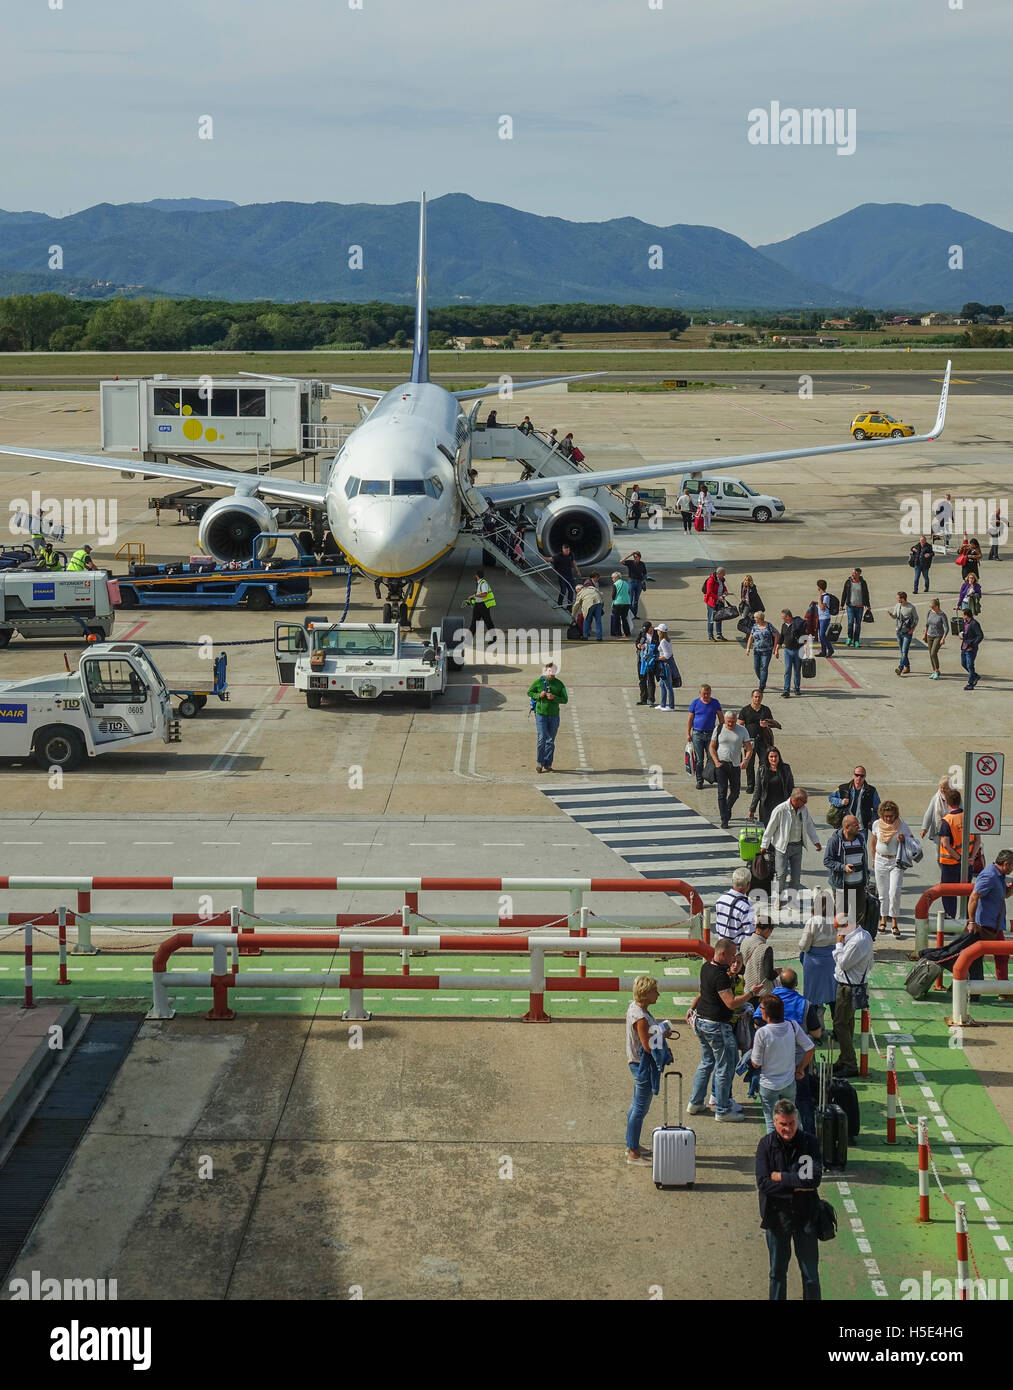 People walking over runway at airport to the arrival terminal Stock Photo